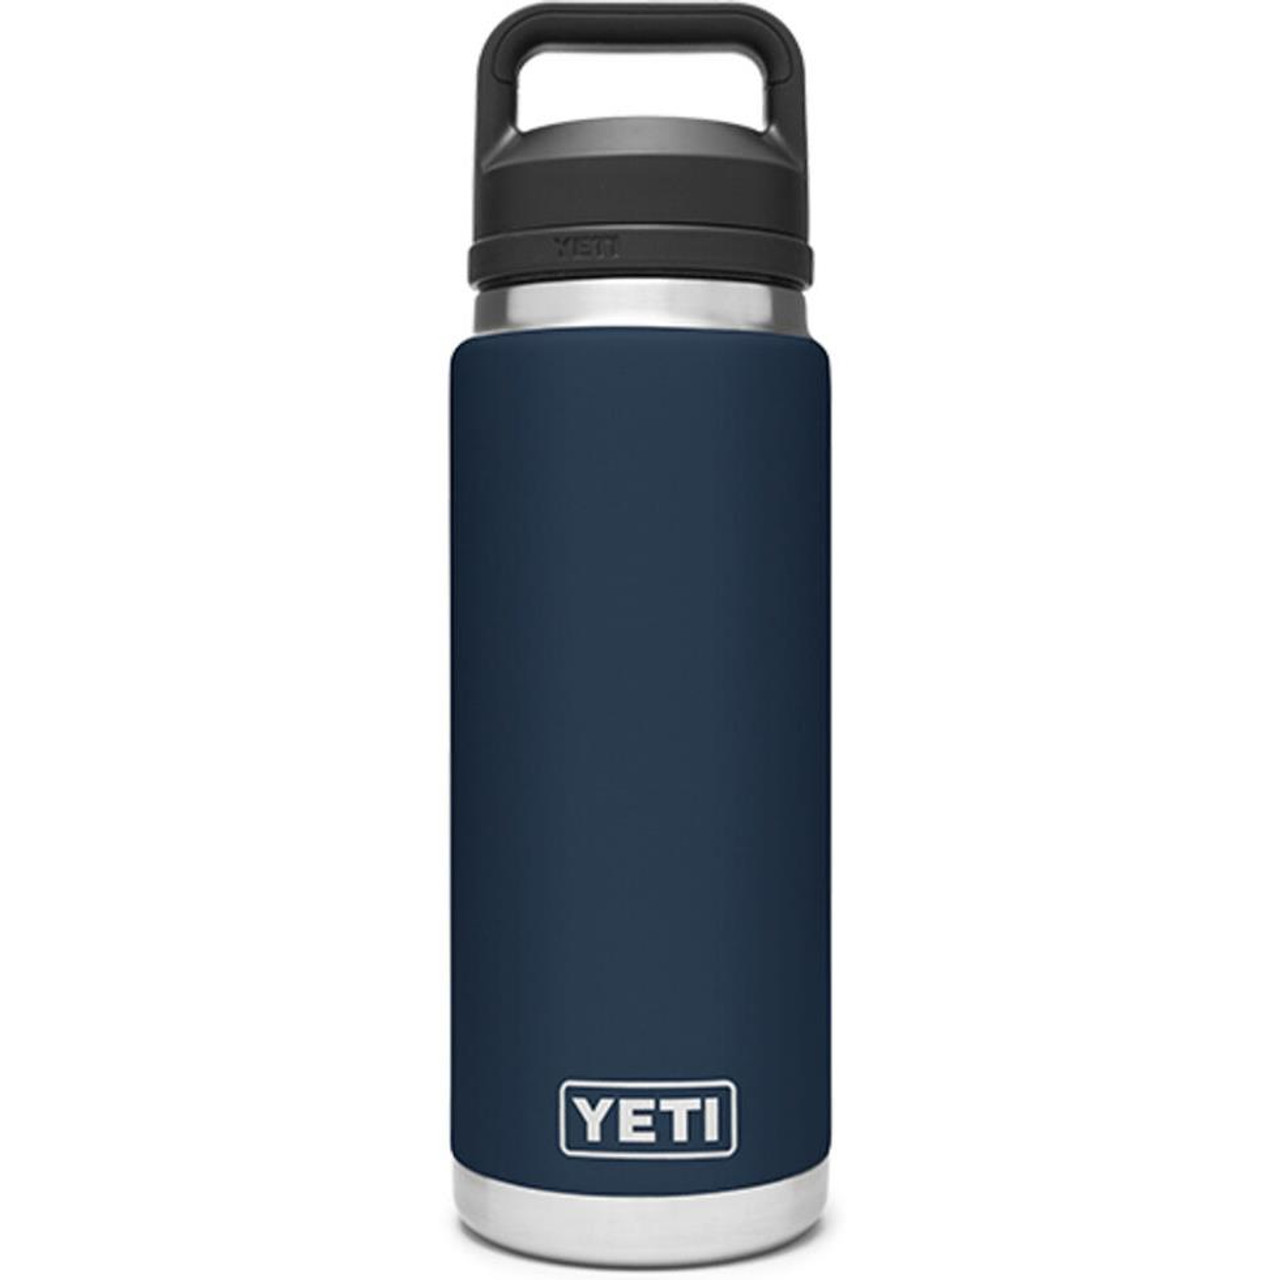 https://cdn11.bigcommerce.com/s-70mih4s/images/stencil/1280x1280/products/19576/48240/Yeti-Rambler-26-Bottle-With-Chug-Cap-Navy-888830072950_image1__03692.1597956869.jpg?c=2